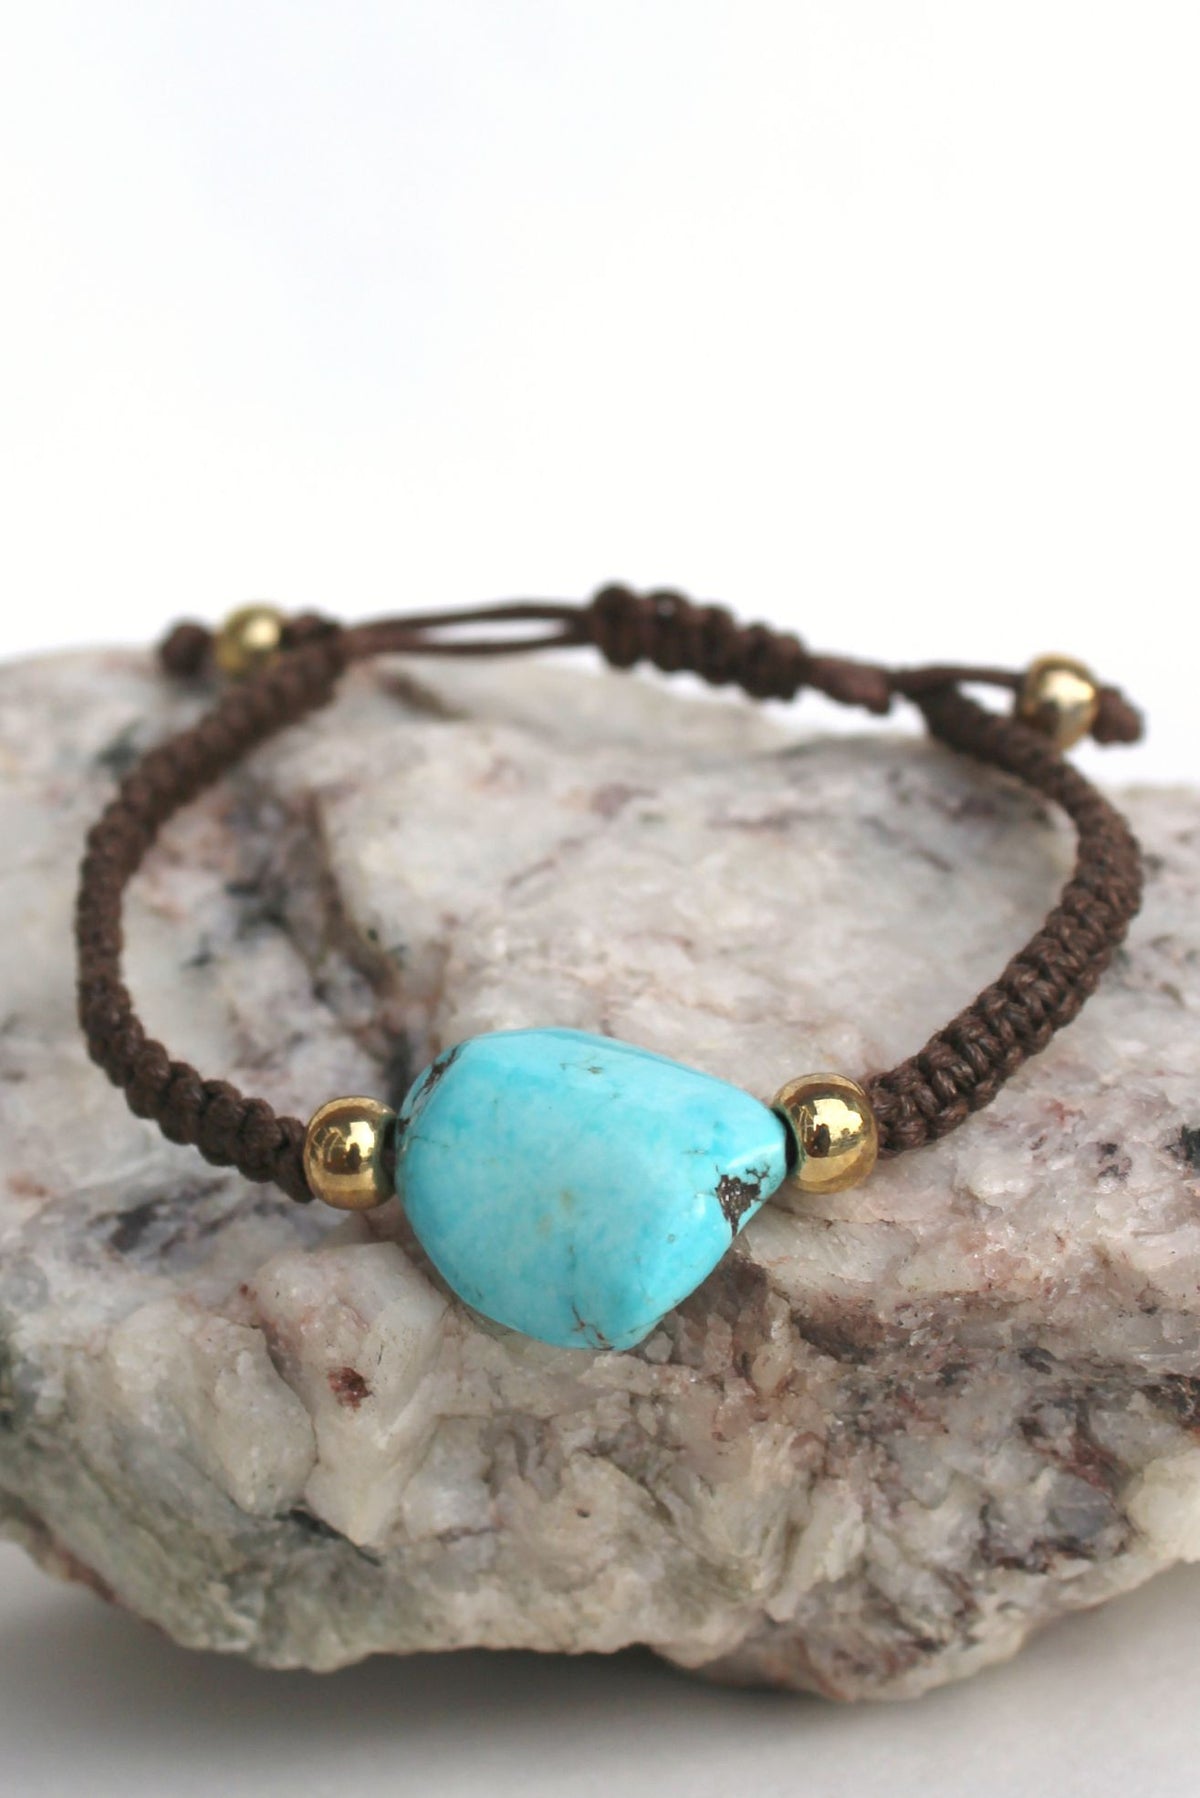 Stone and Braided Cord Bracelet, Turquoise